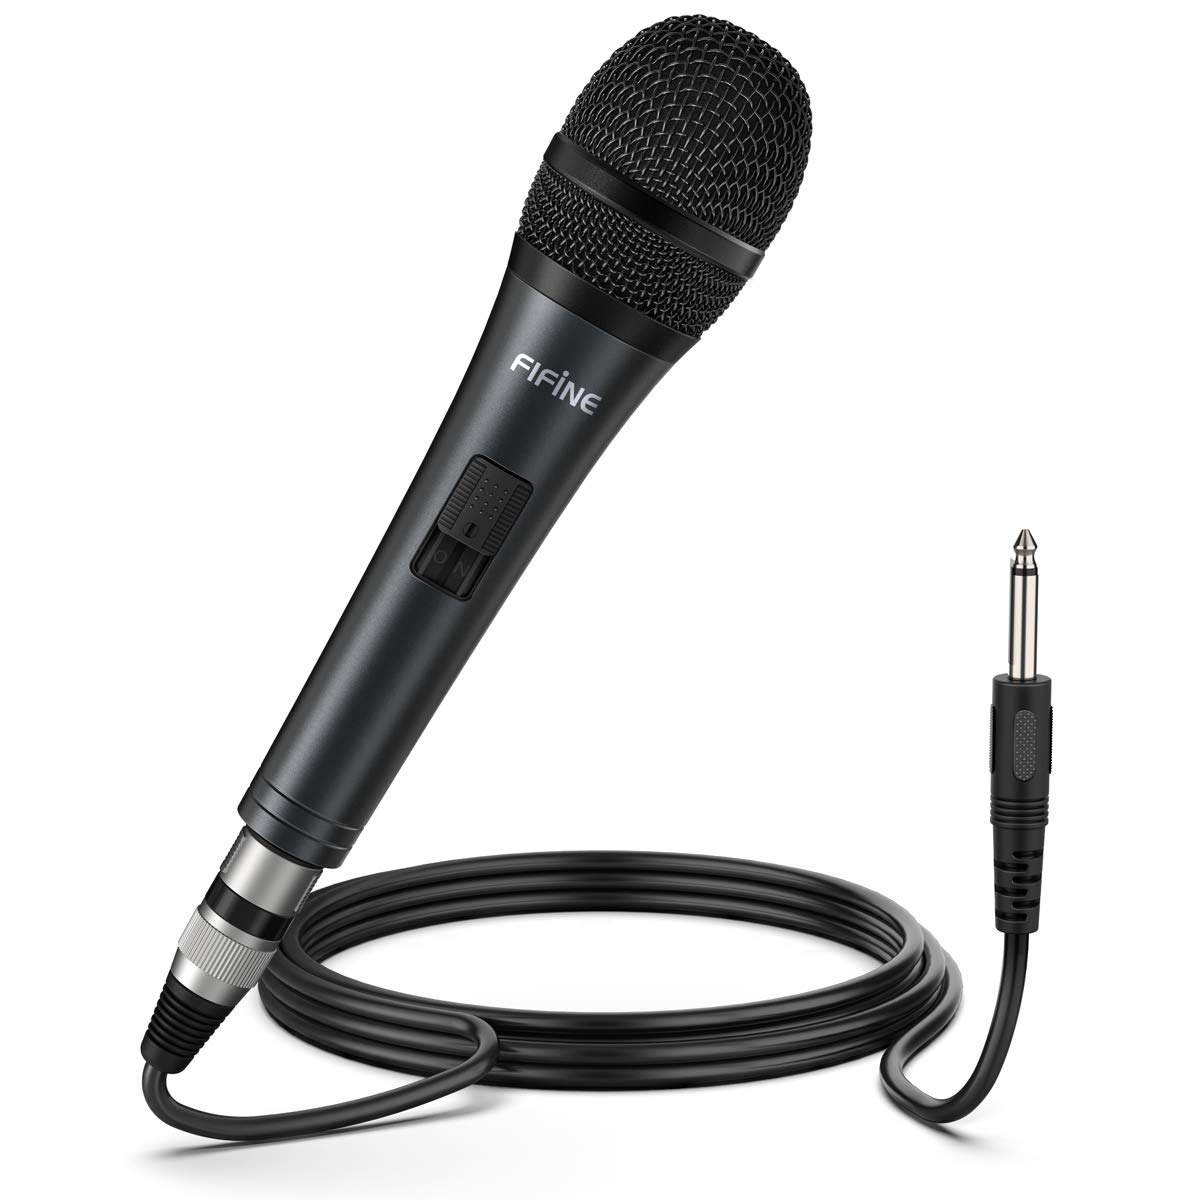 FIFINE USB Gaming Microphone, RGB Dynamic Mic for PC, with Tap-to-Mute  Button, Plug & Play Cardioid Mic with Headphone Jack for Streaming,  Podcast